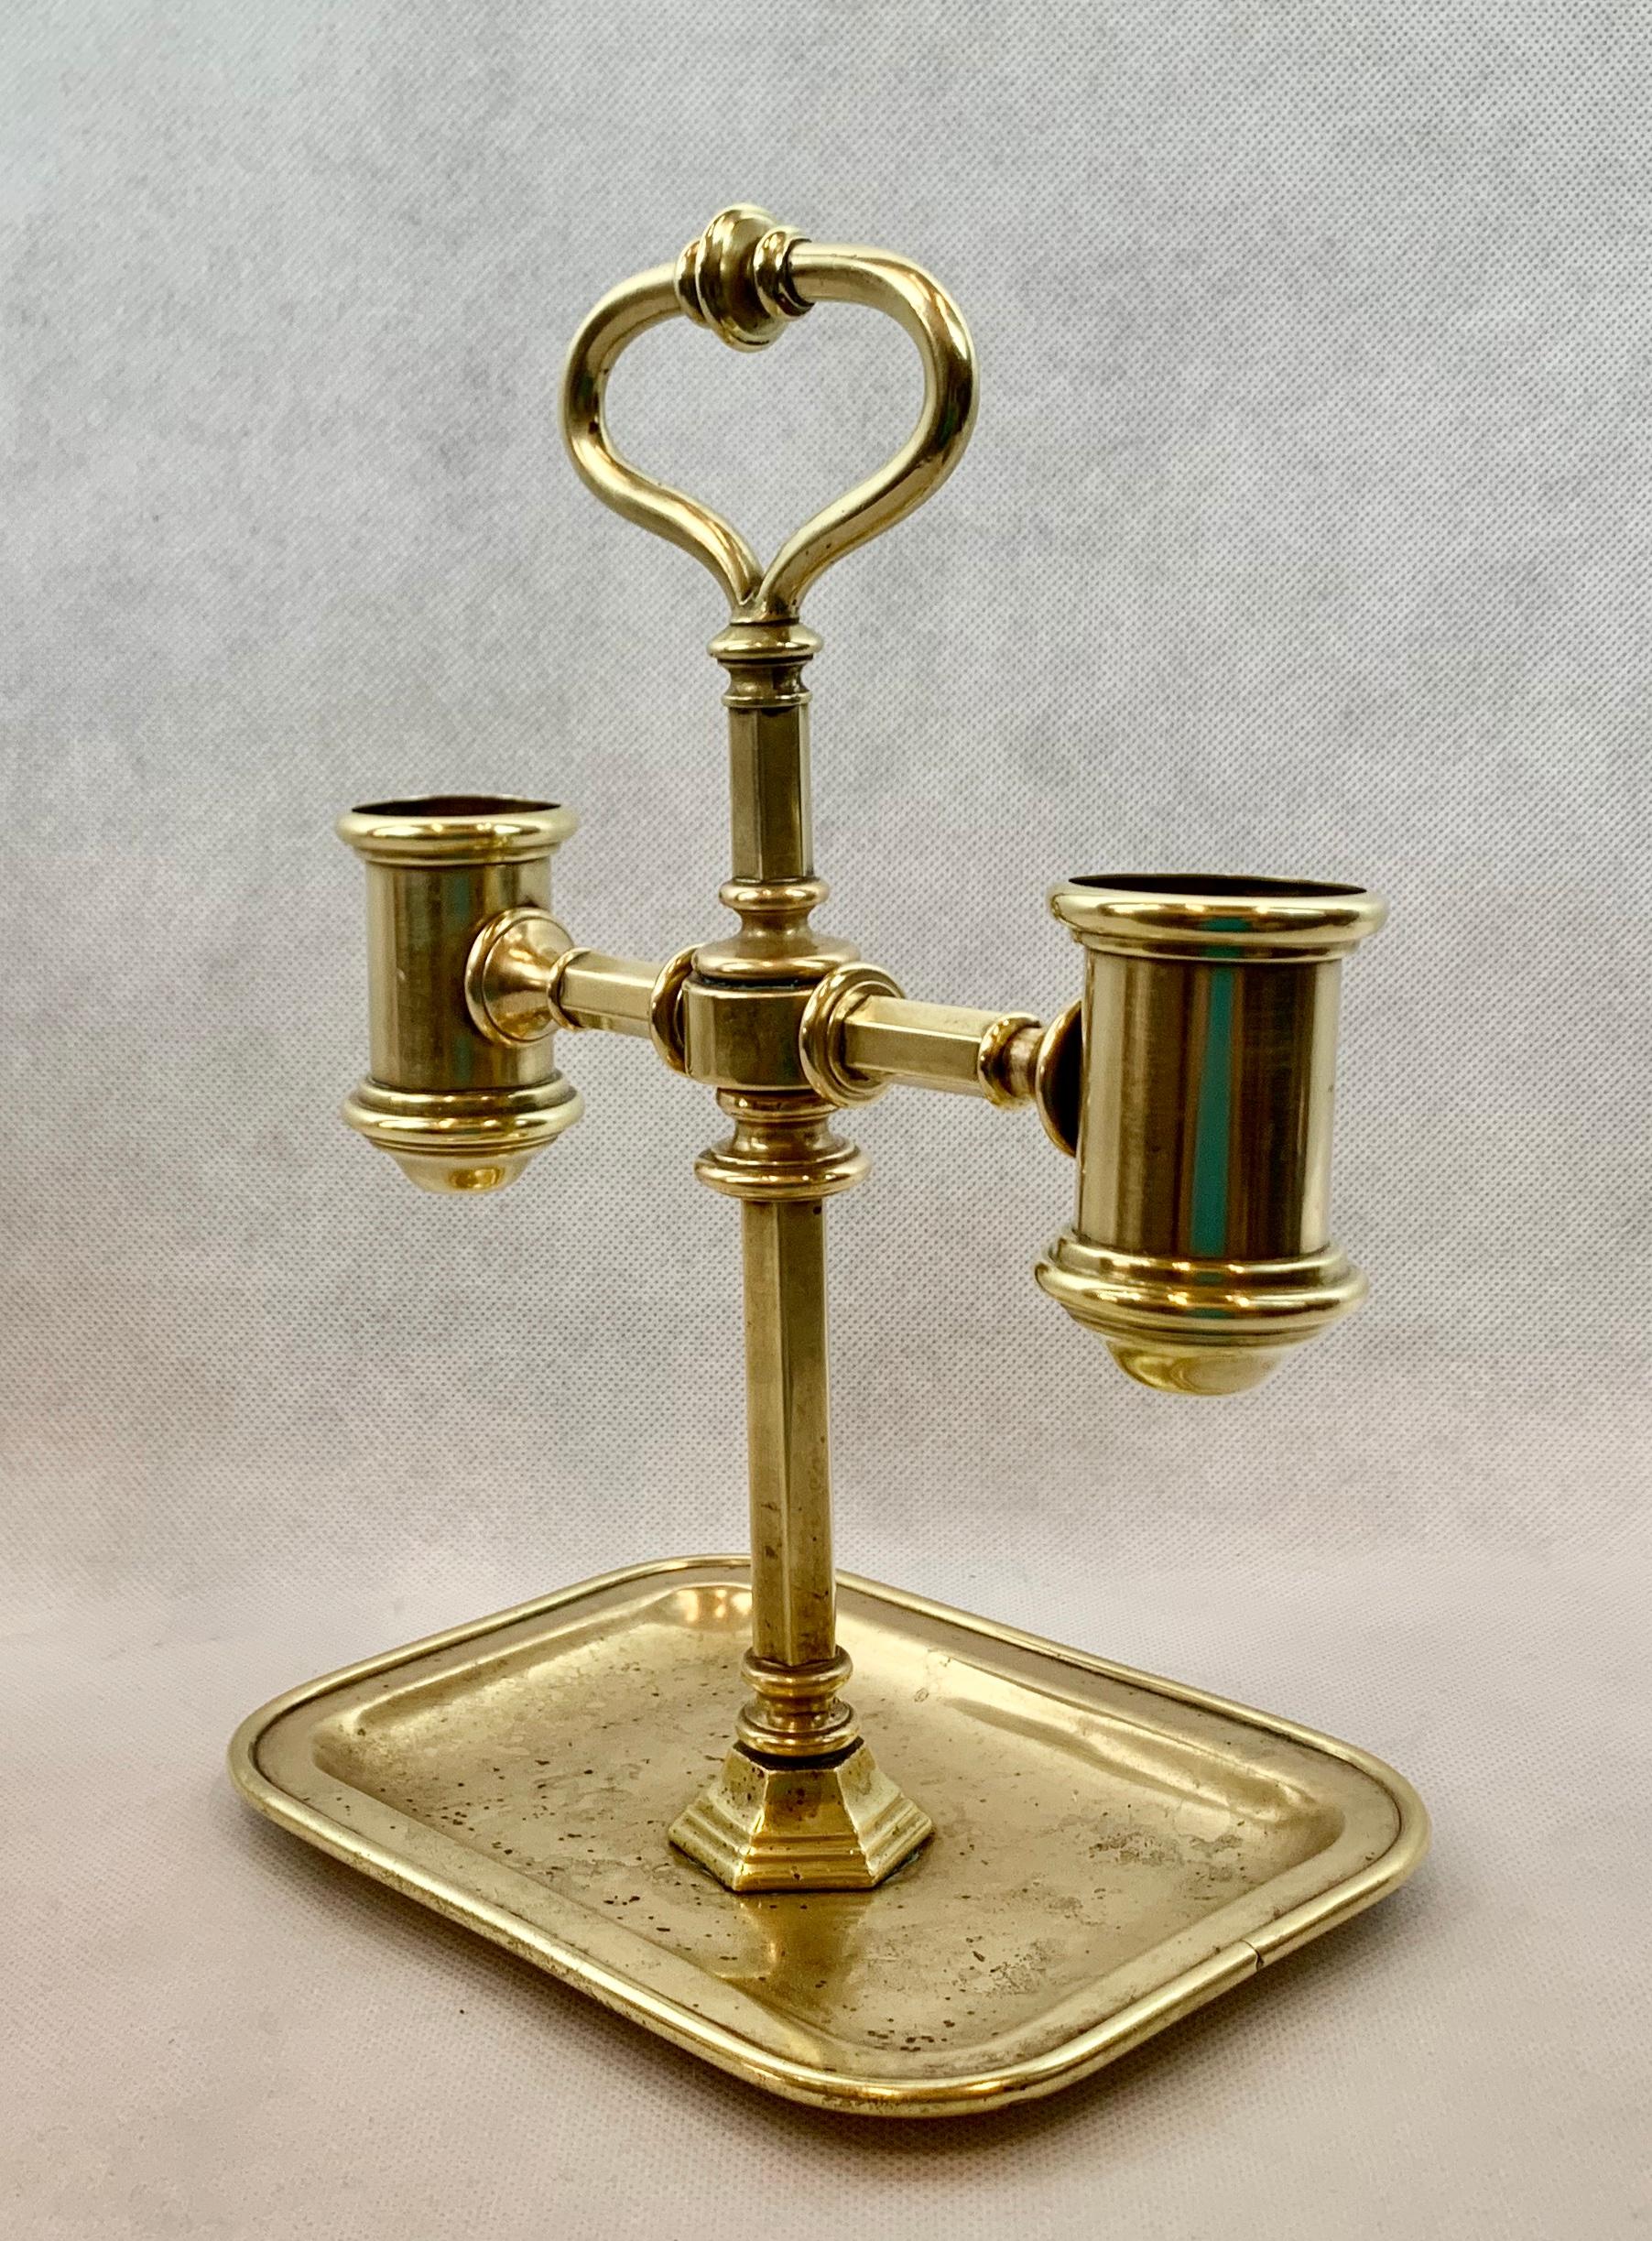 Handsome solid brass double candlstand with attached tray. At the top there is a decorative handle for carrying. This piece could also be electrified easily using two small shades or one larger shade.
 (We go through the laborious task of hand